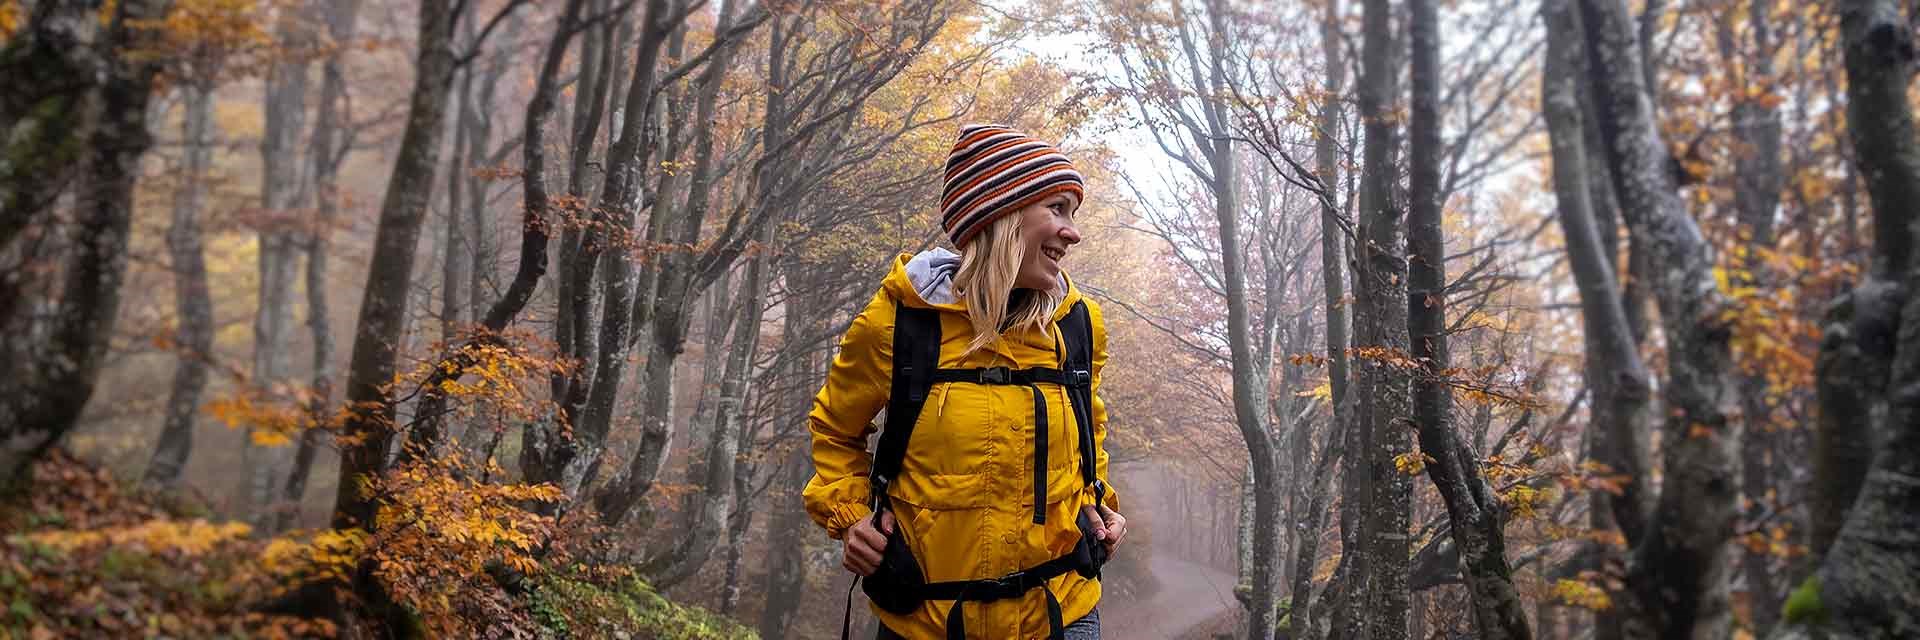 Woman in warm clothes walking in woods